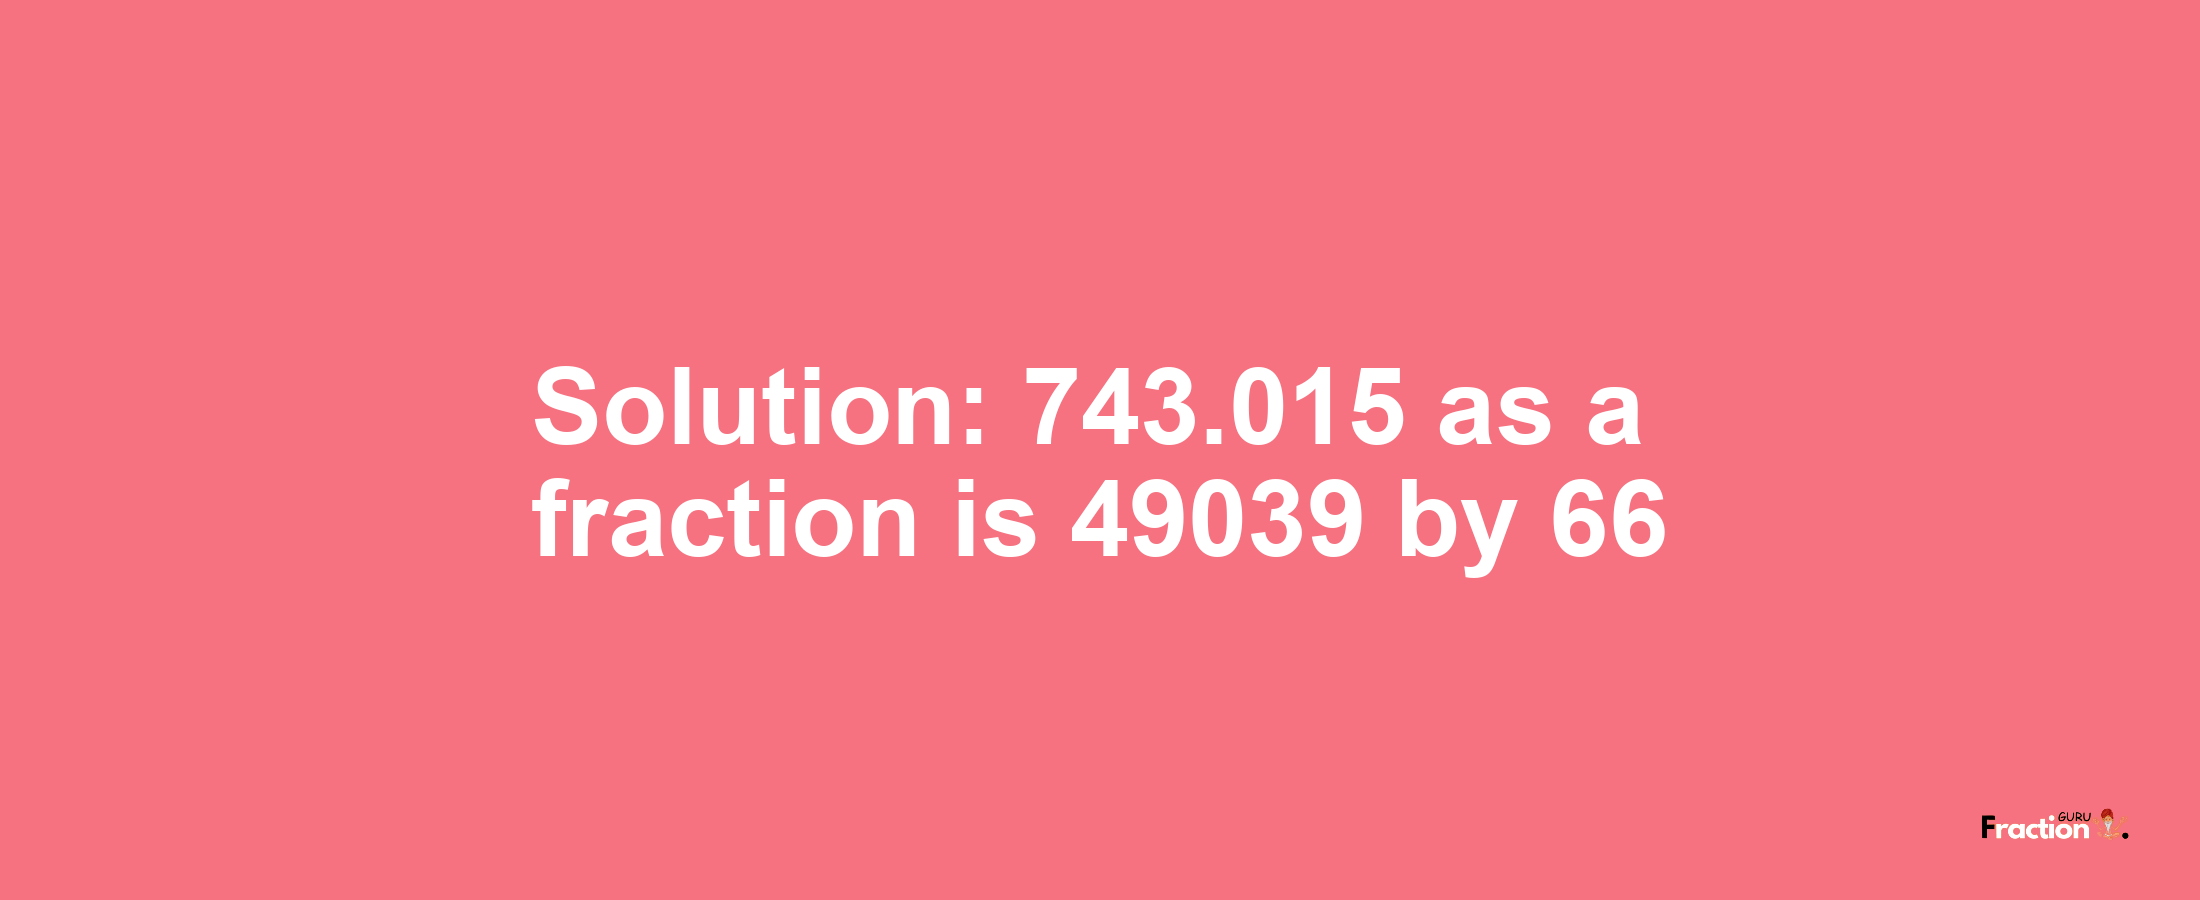 Solution:743.015 as a fraction is 49039/66